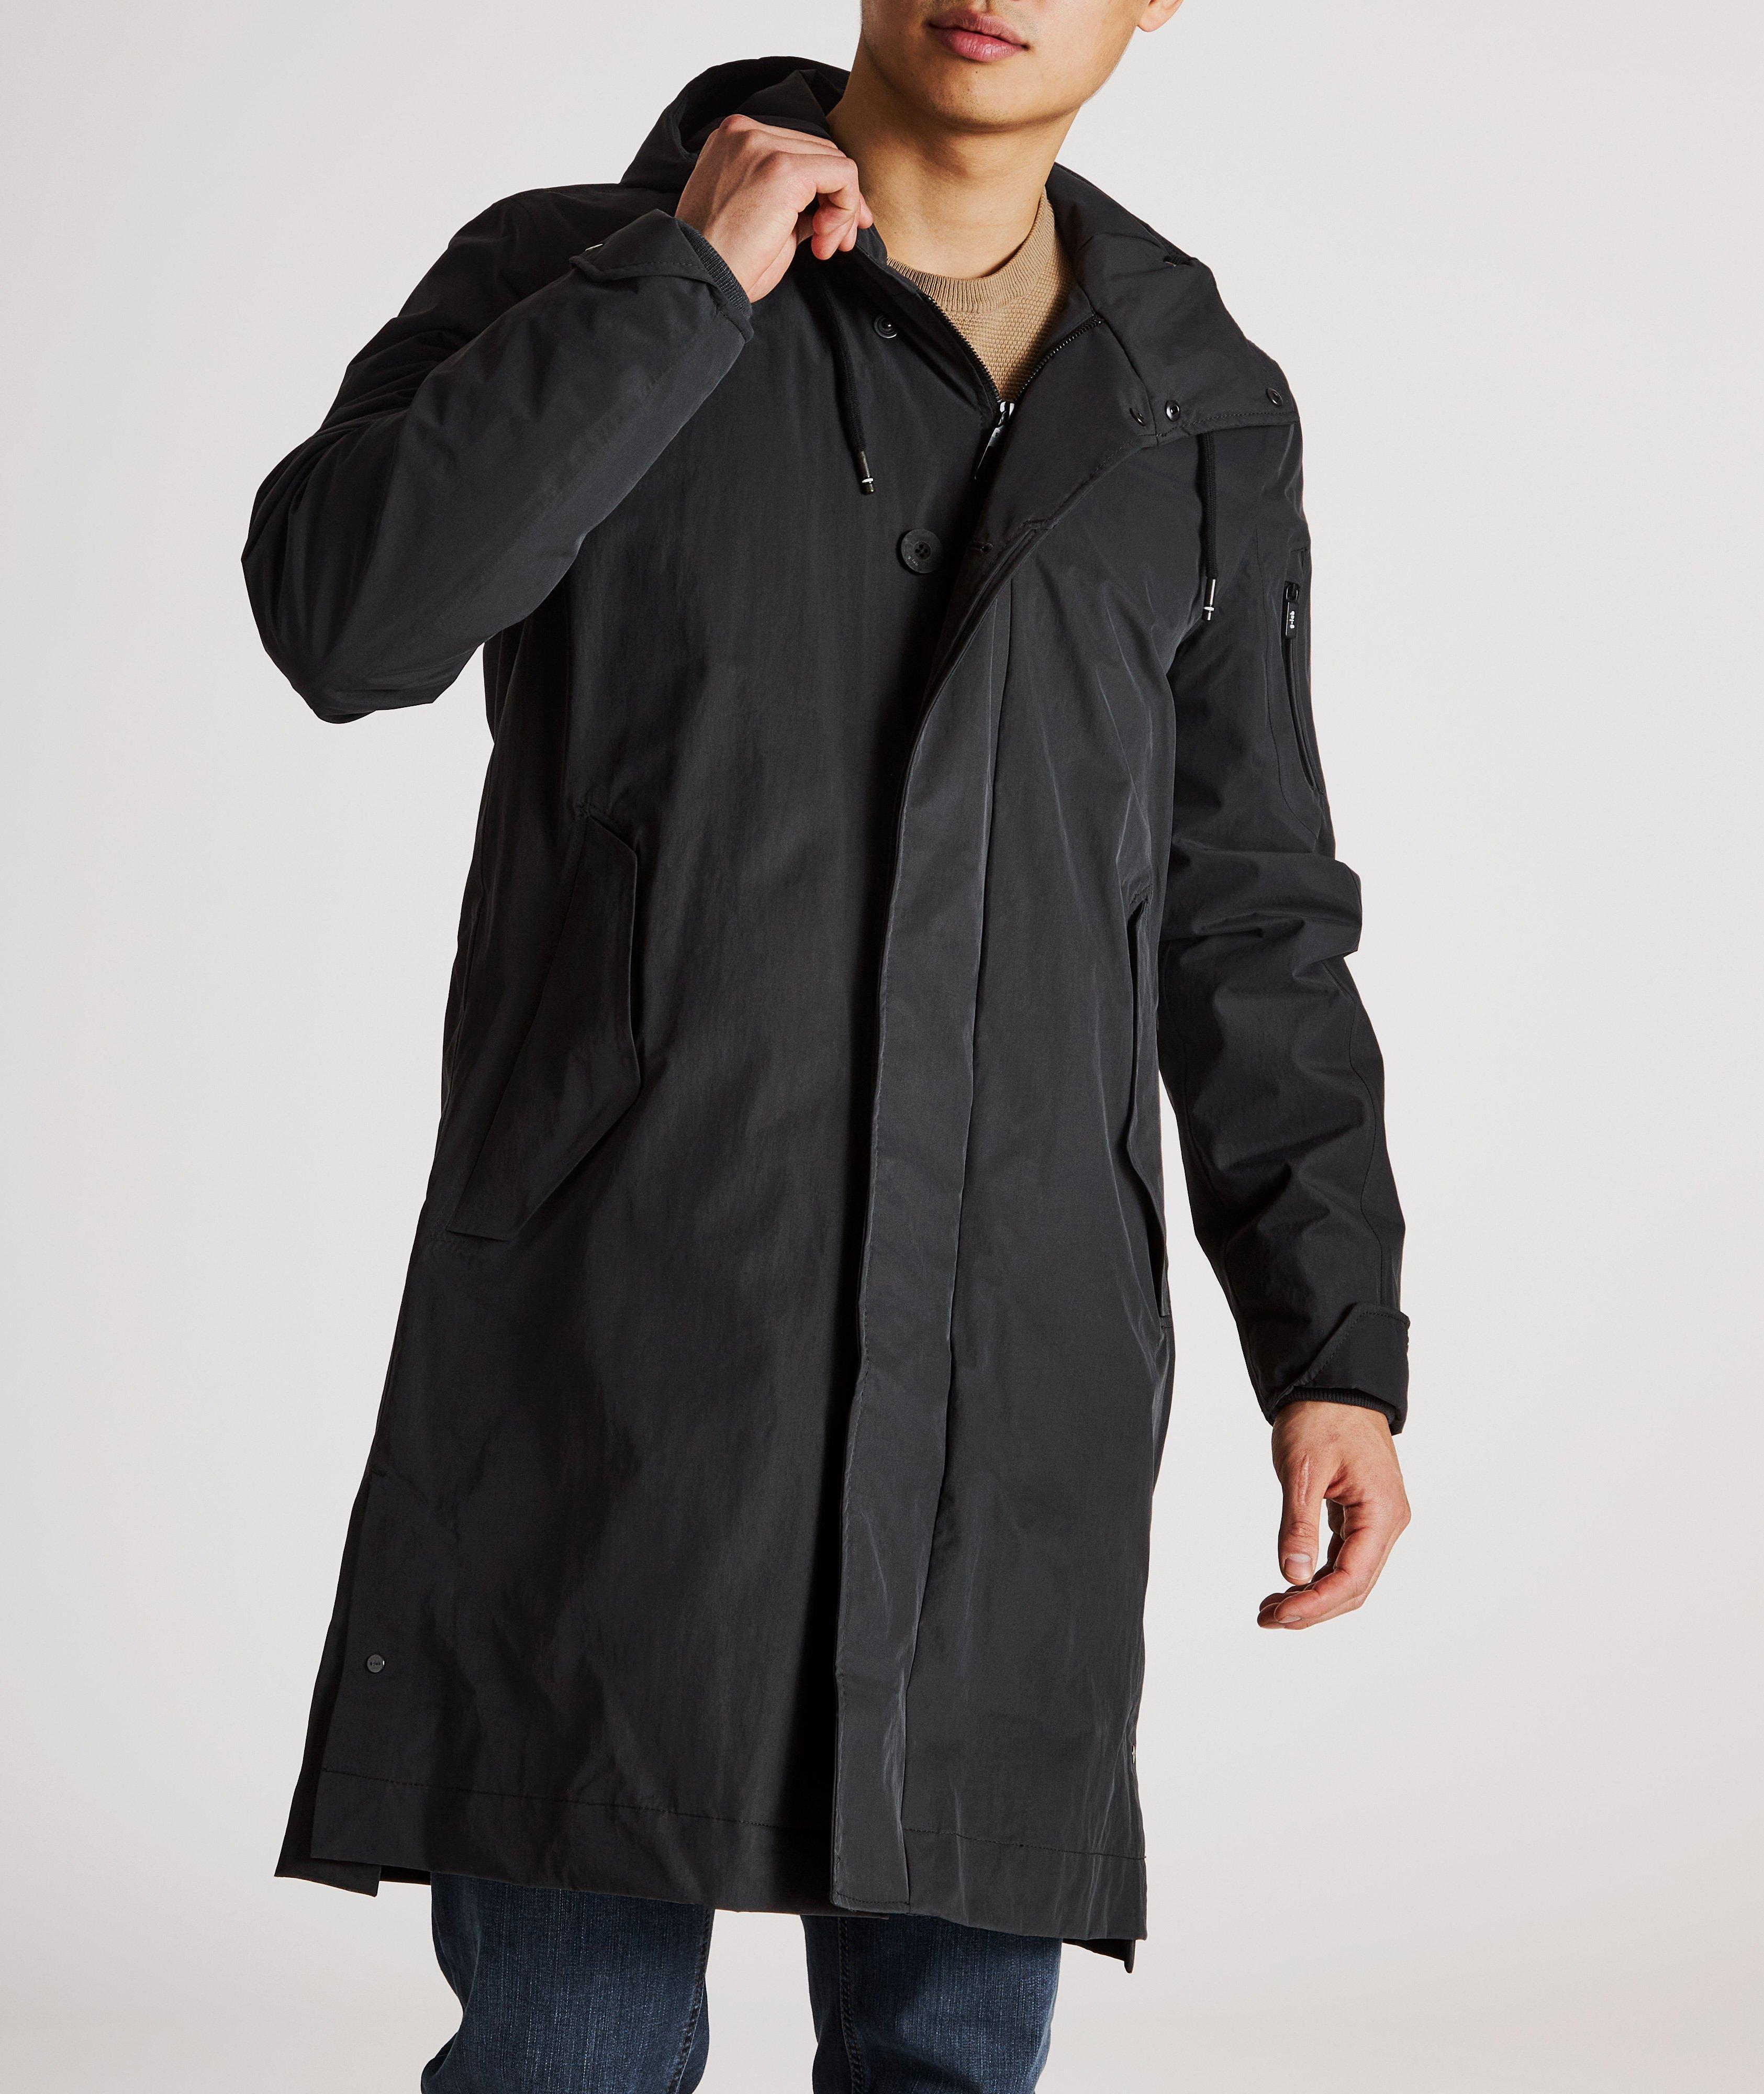 SHIELD Technical Hooded 3/4 Parka image 1